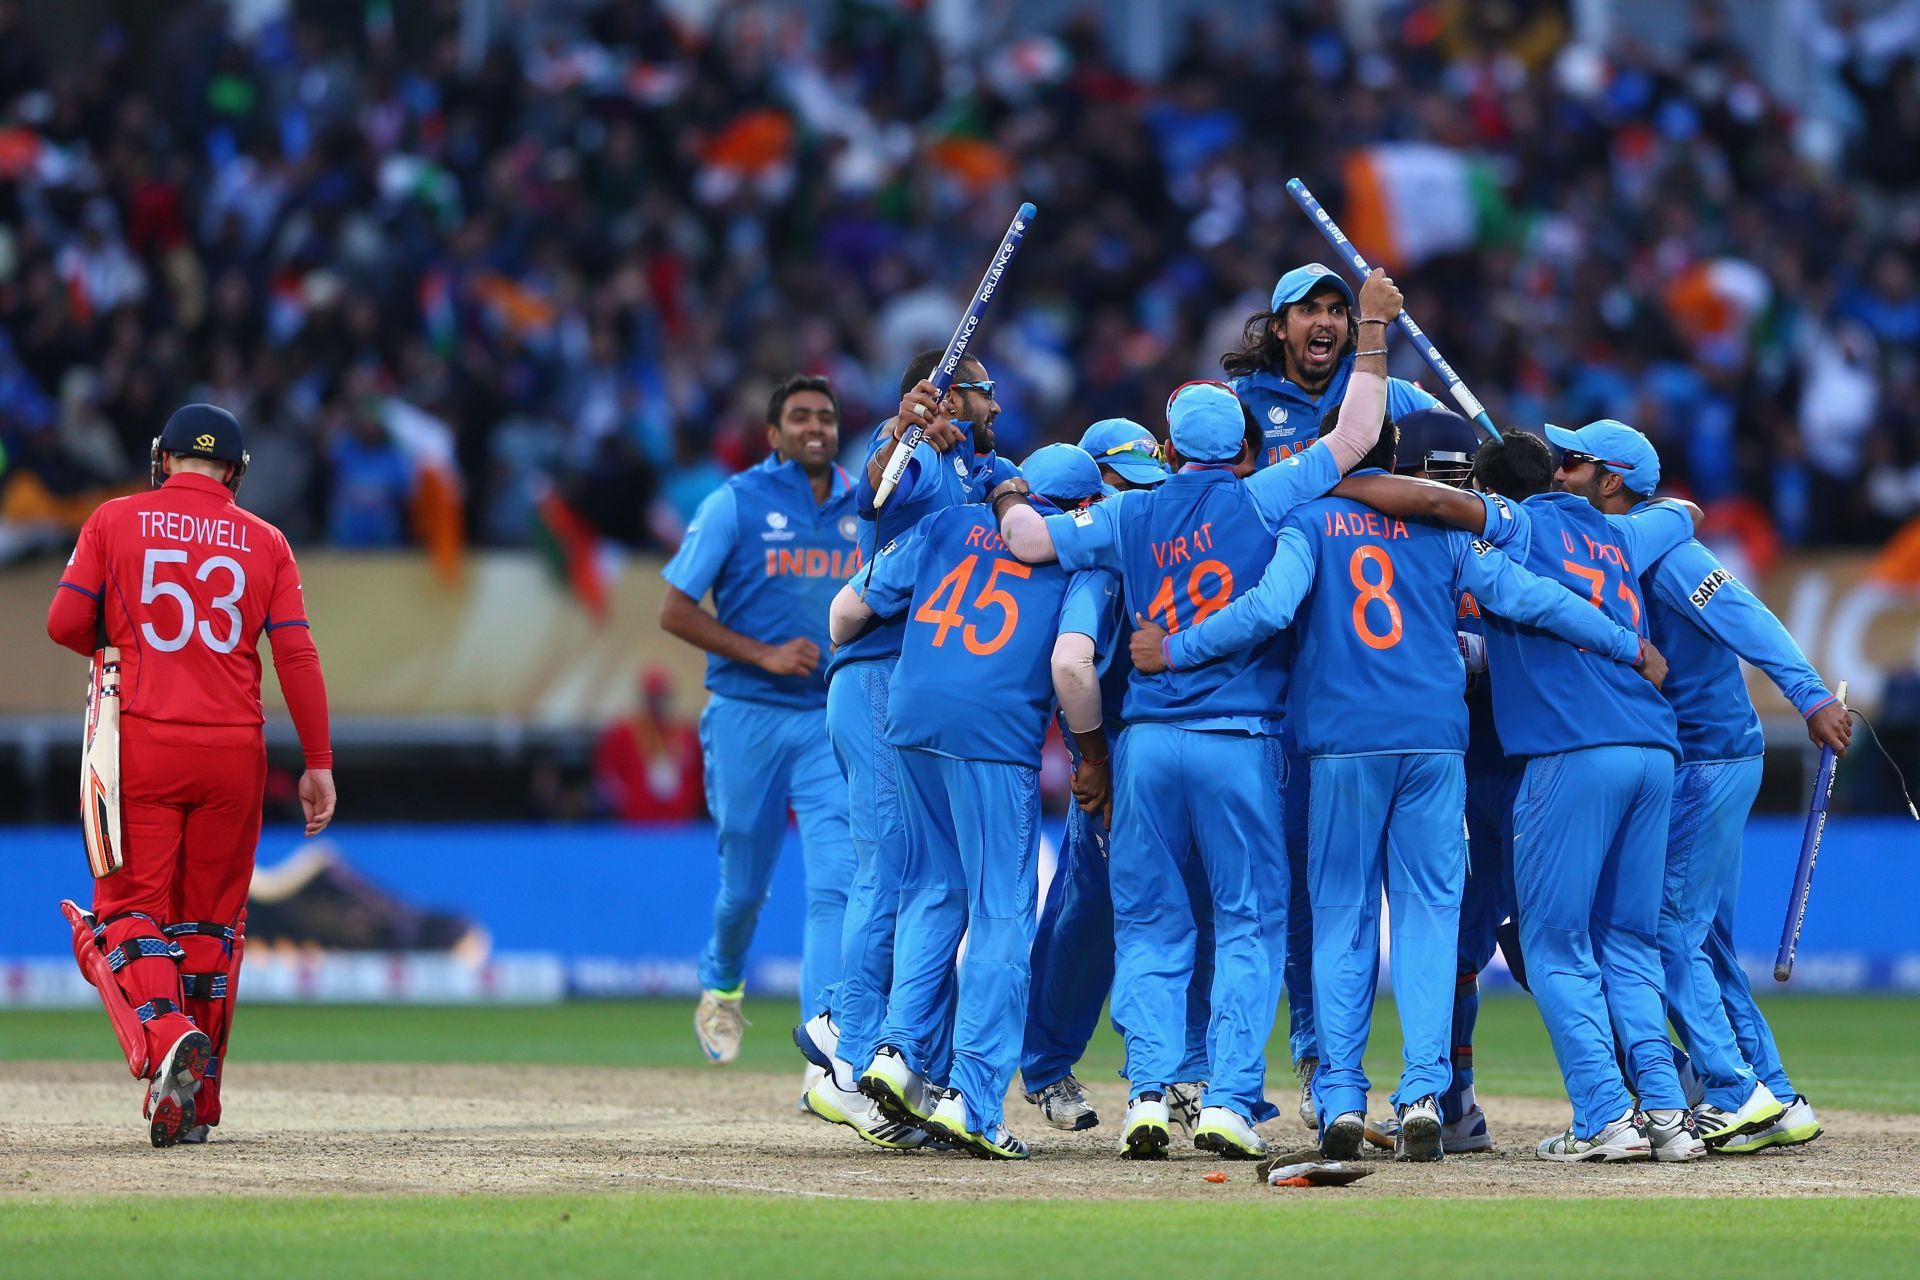 India celebrate after winning the 2013 Champions Trophy final. Pic: Getty Images